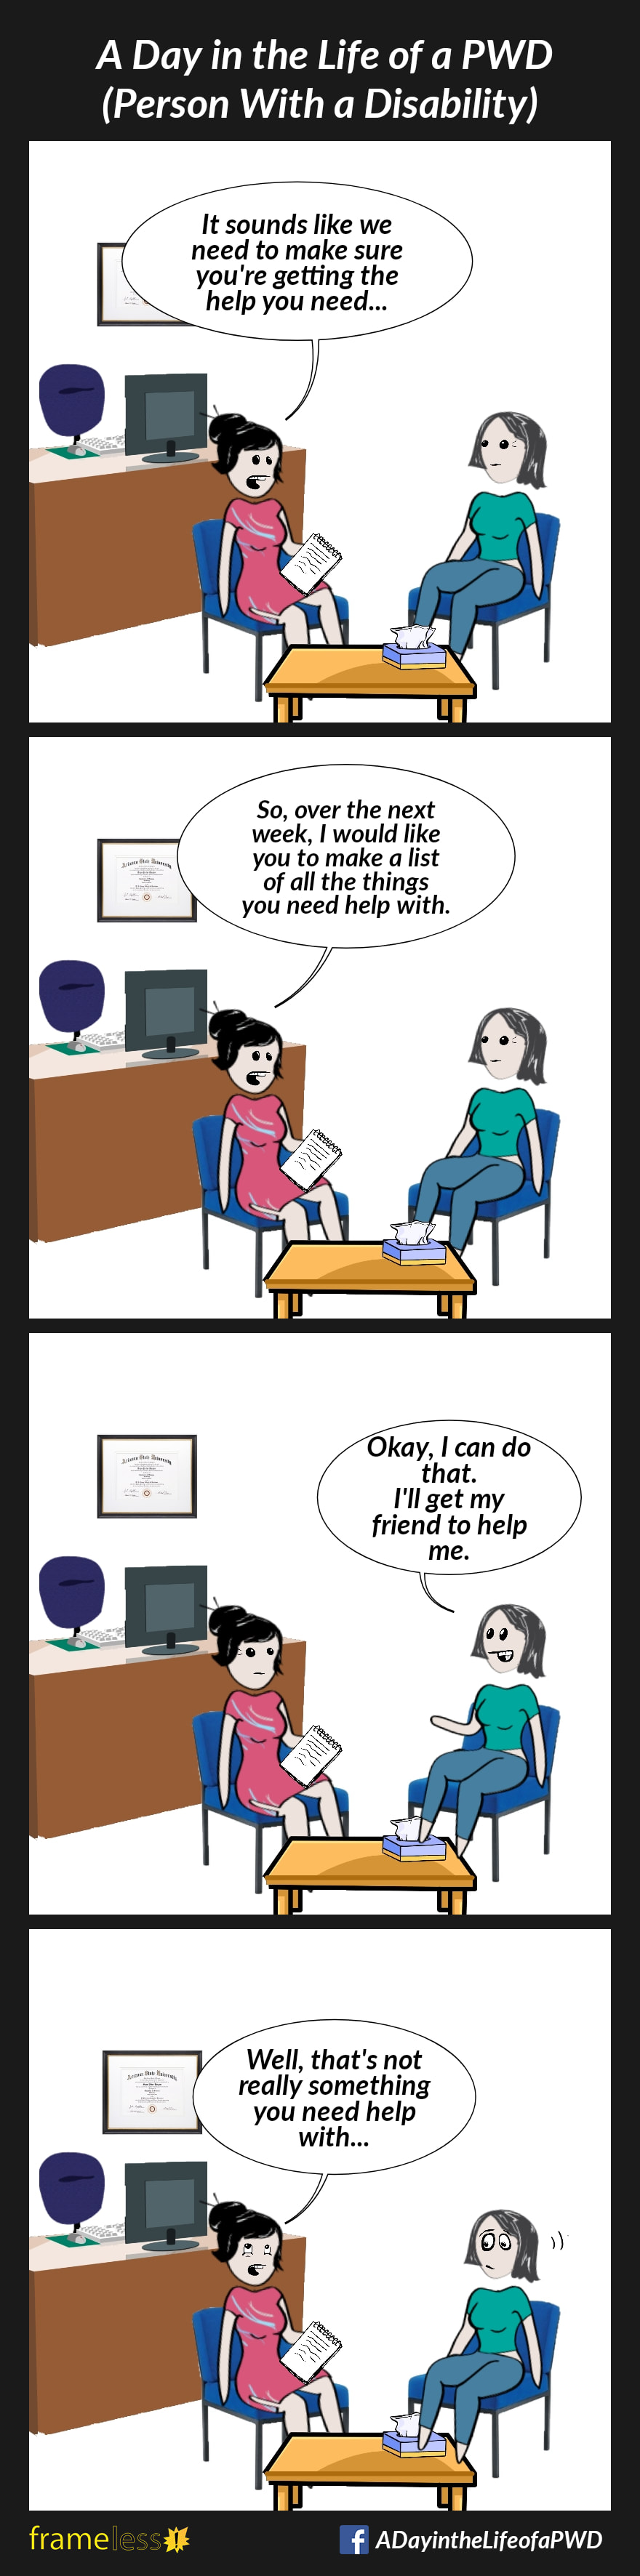 COMIC STRIP 
A Day in the Life of a PWD (Person With a Disability) 

Frame 1:
A woman is at a therapist's appointment. 
THERAPIST: It sounds like we need to make sure you're getting the help you need...

Frame 2:
THERAPIST: So, over the next week, I'd like you to make a list of all the things you need help with.

Frame 3:
WOMAN: Okay, I can do that. I'll get my friend to help me.

Frame 4:
THERAPIST: Well, that's not really something you need help with...